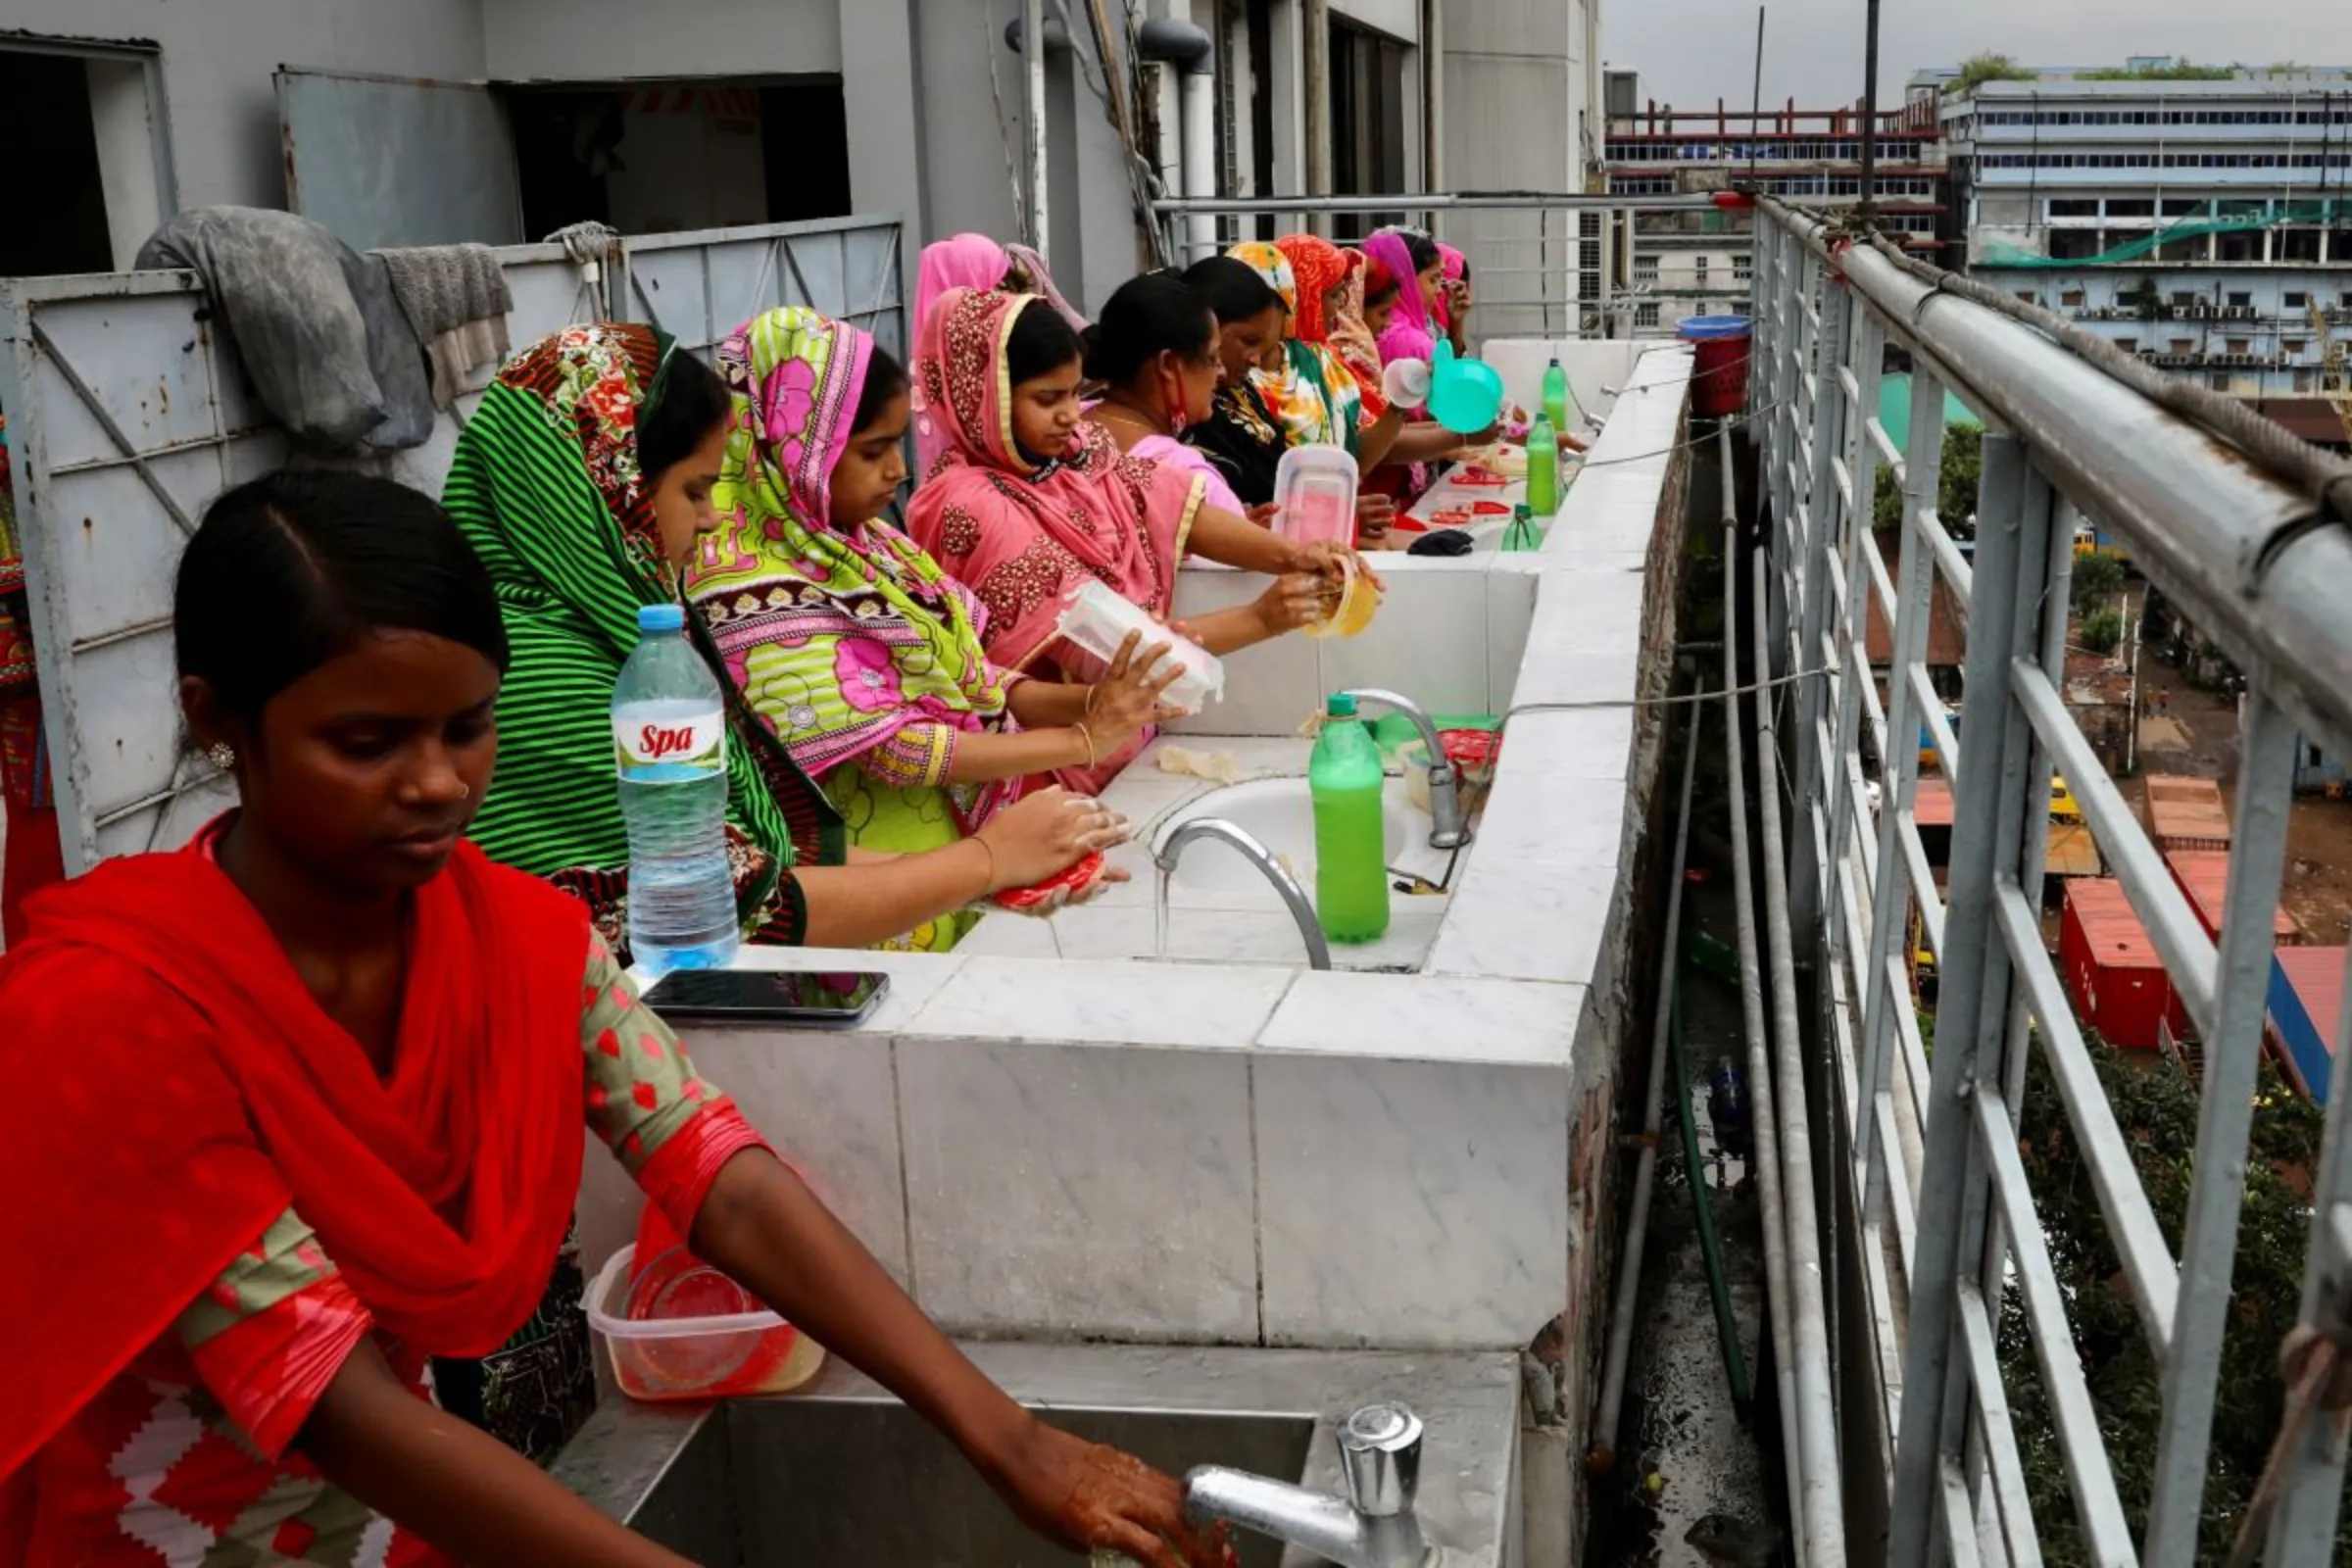 Employees wash their hands before lunch at The Civil Engineering Limited garment factory in Dhaka, Bangladesh, August 17, 2021. REUTERS/Mohammad Ponir Hossain